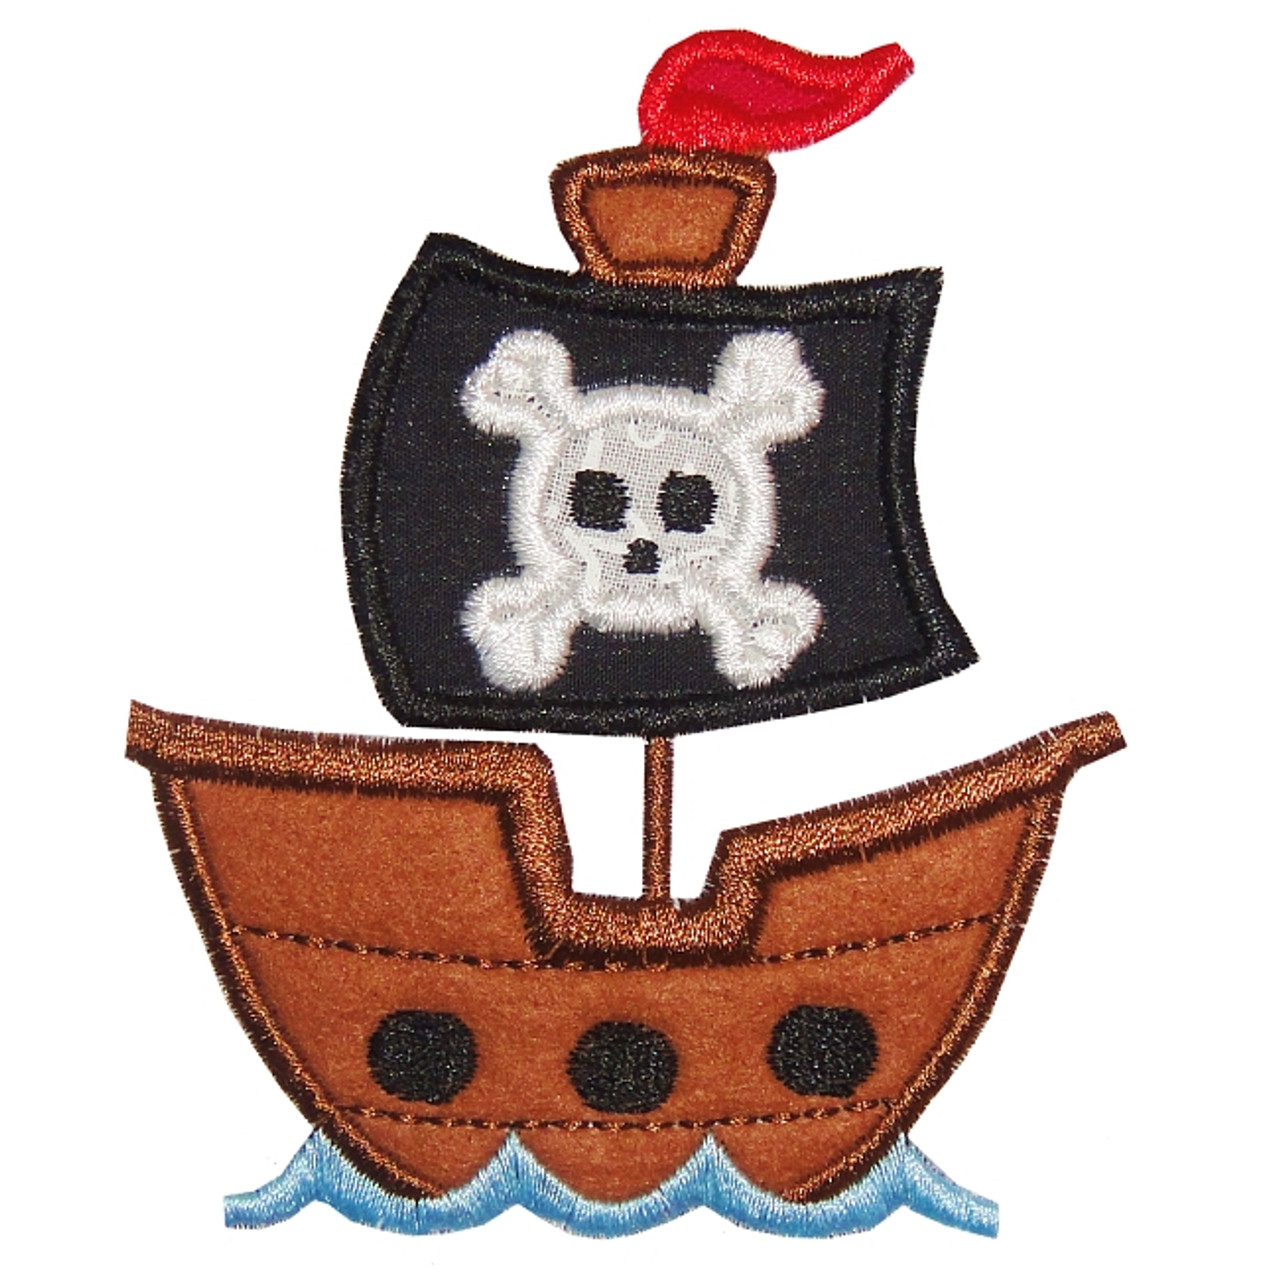 ITH Pirate Patch Embroidery Machine Design